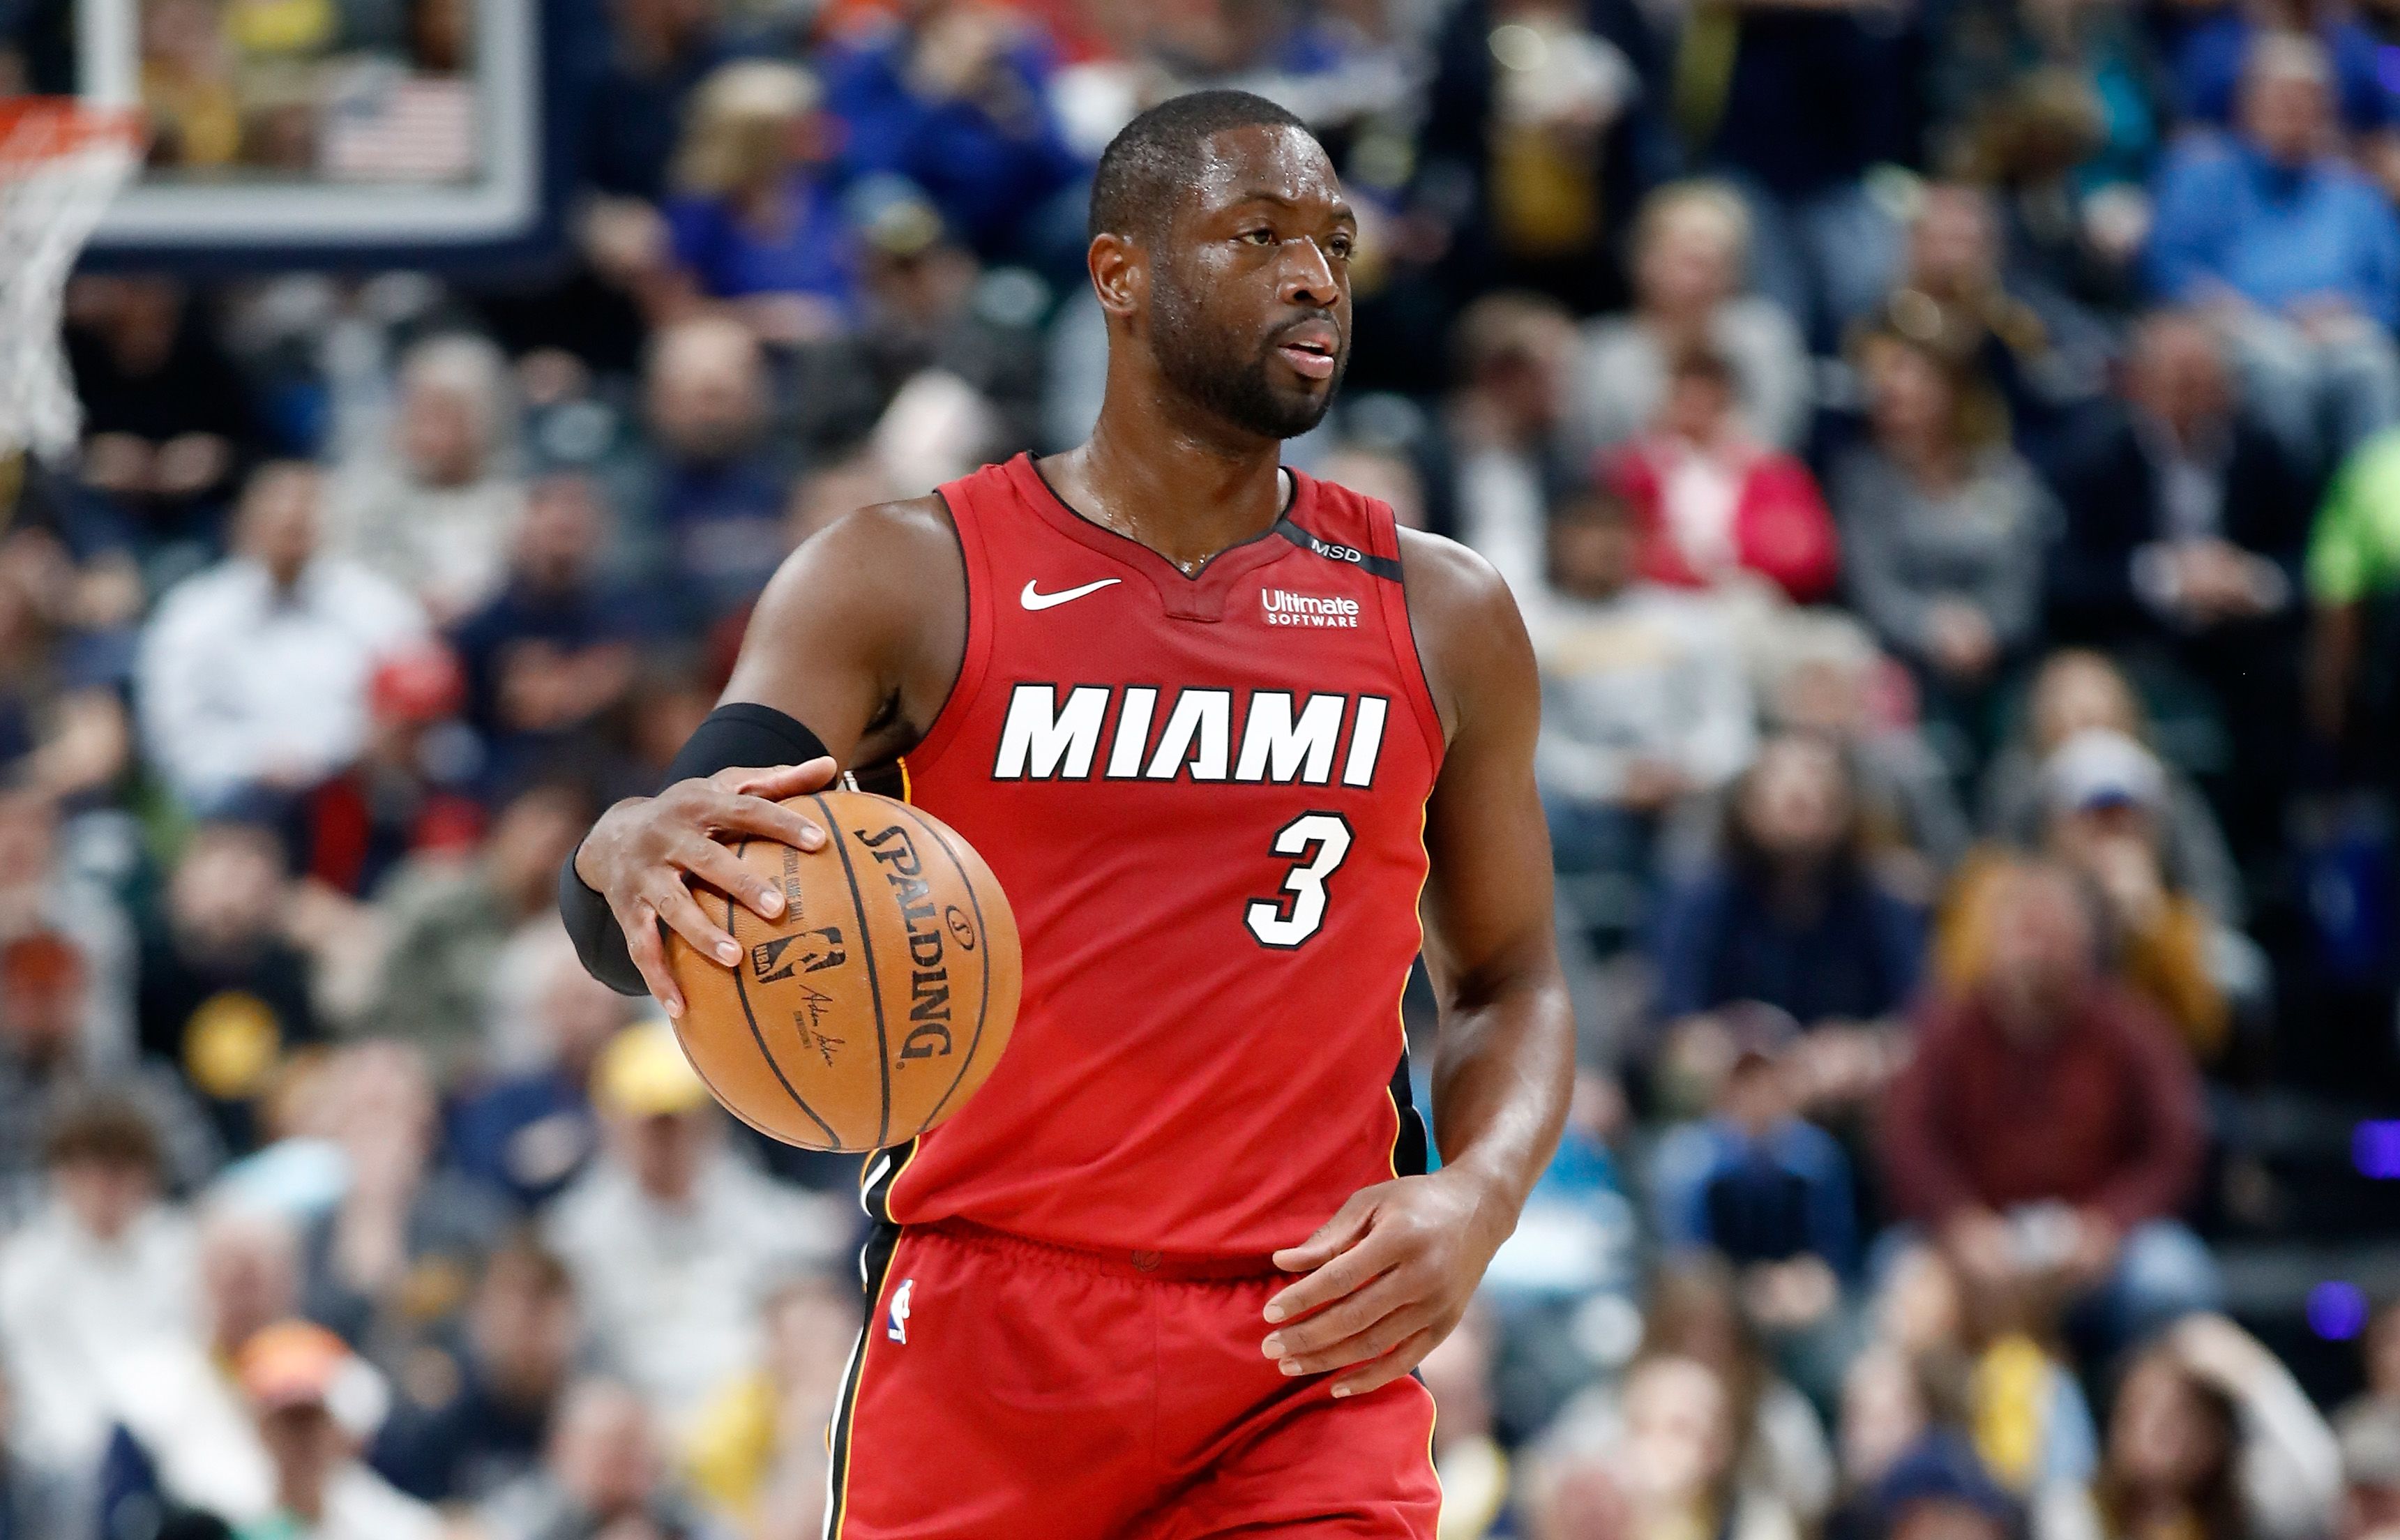 Dwyane Wade Reflects on His NBA Career, 'Shifting the Culture' in